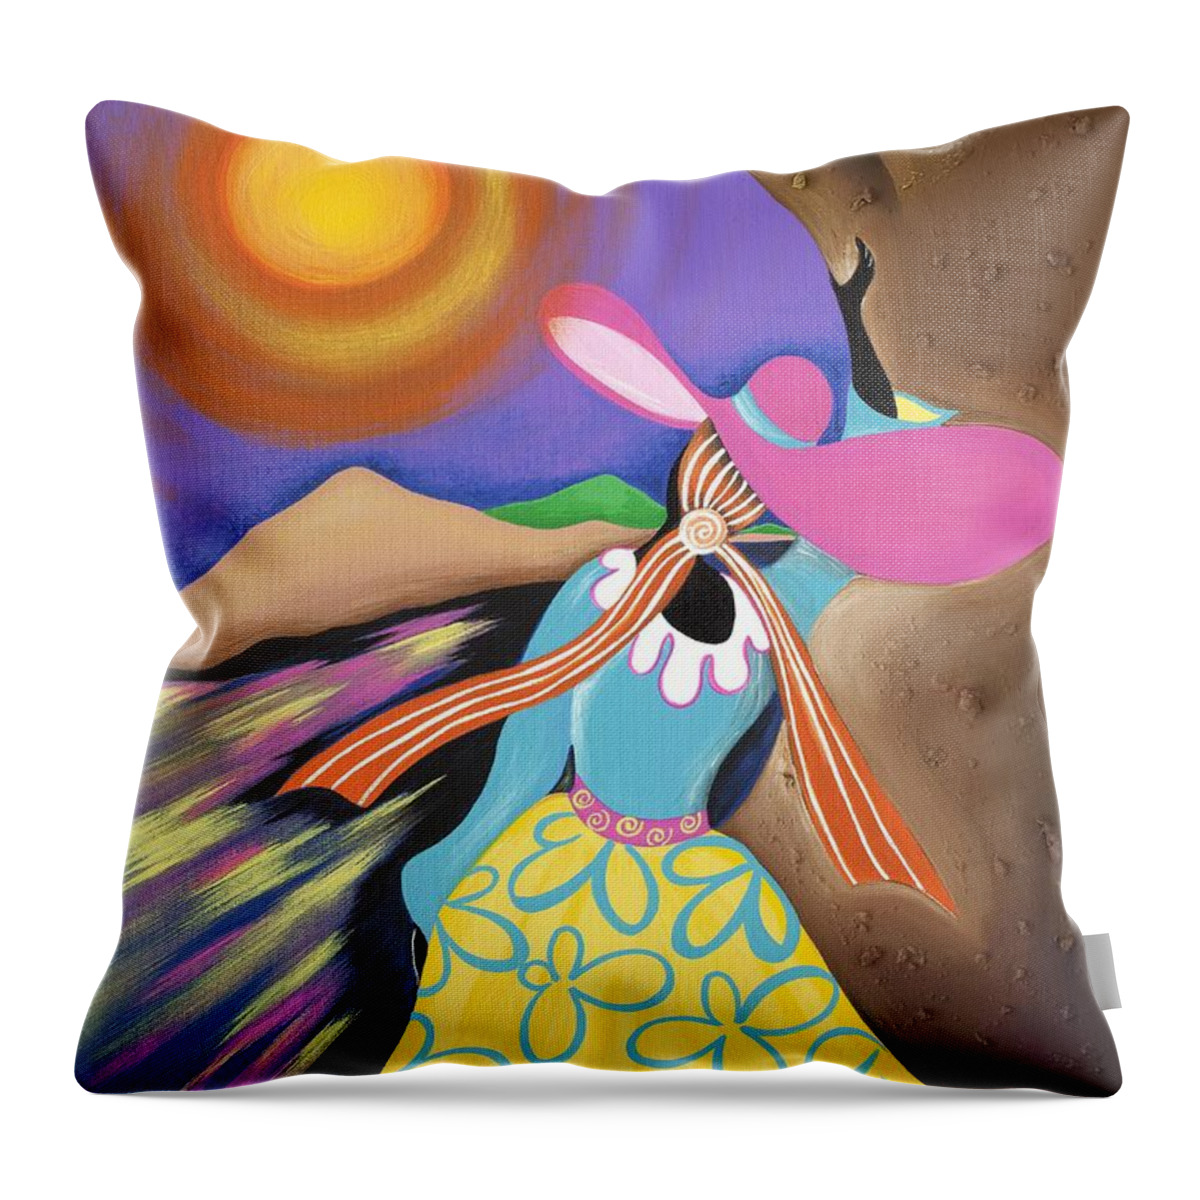 Sabree Throw Pillow featuring the painting Rise by Patricia Sabreee